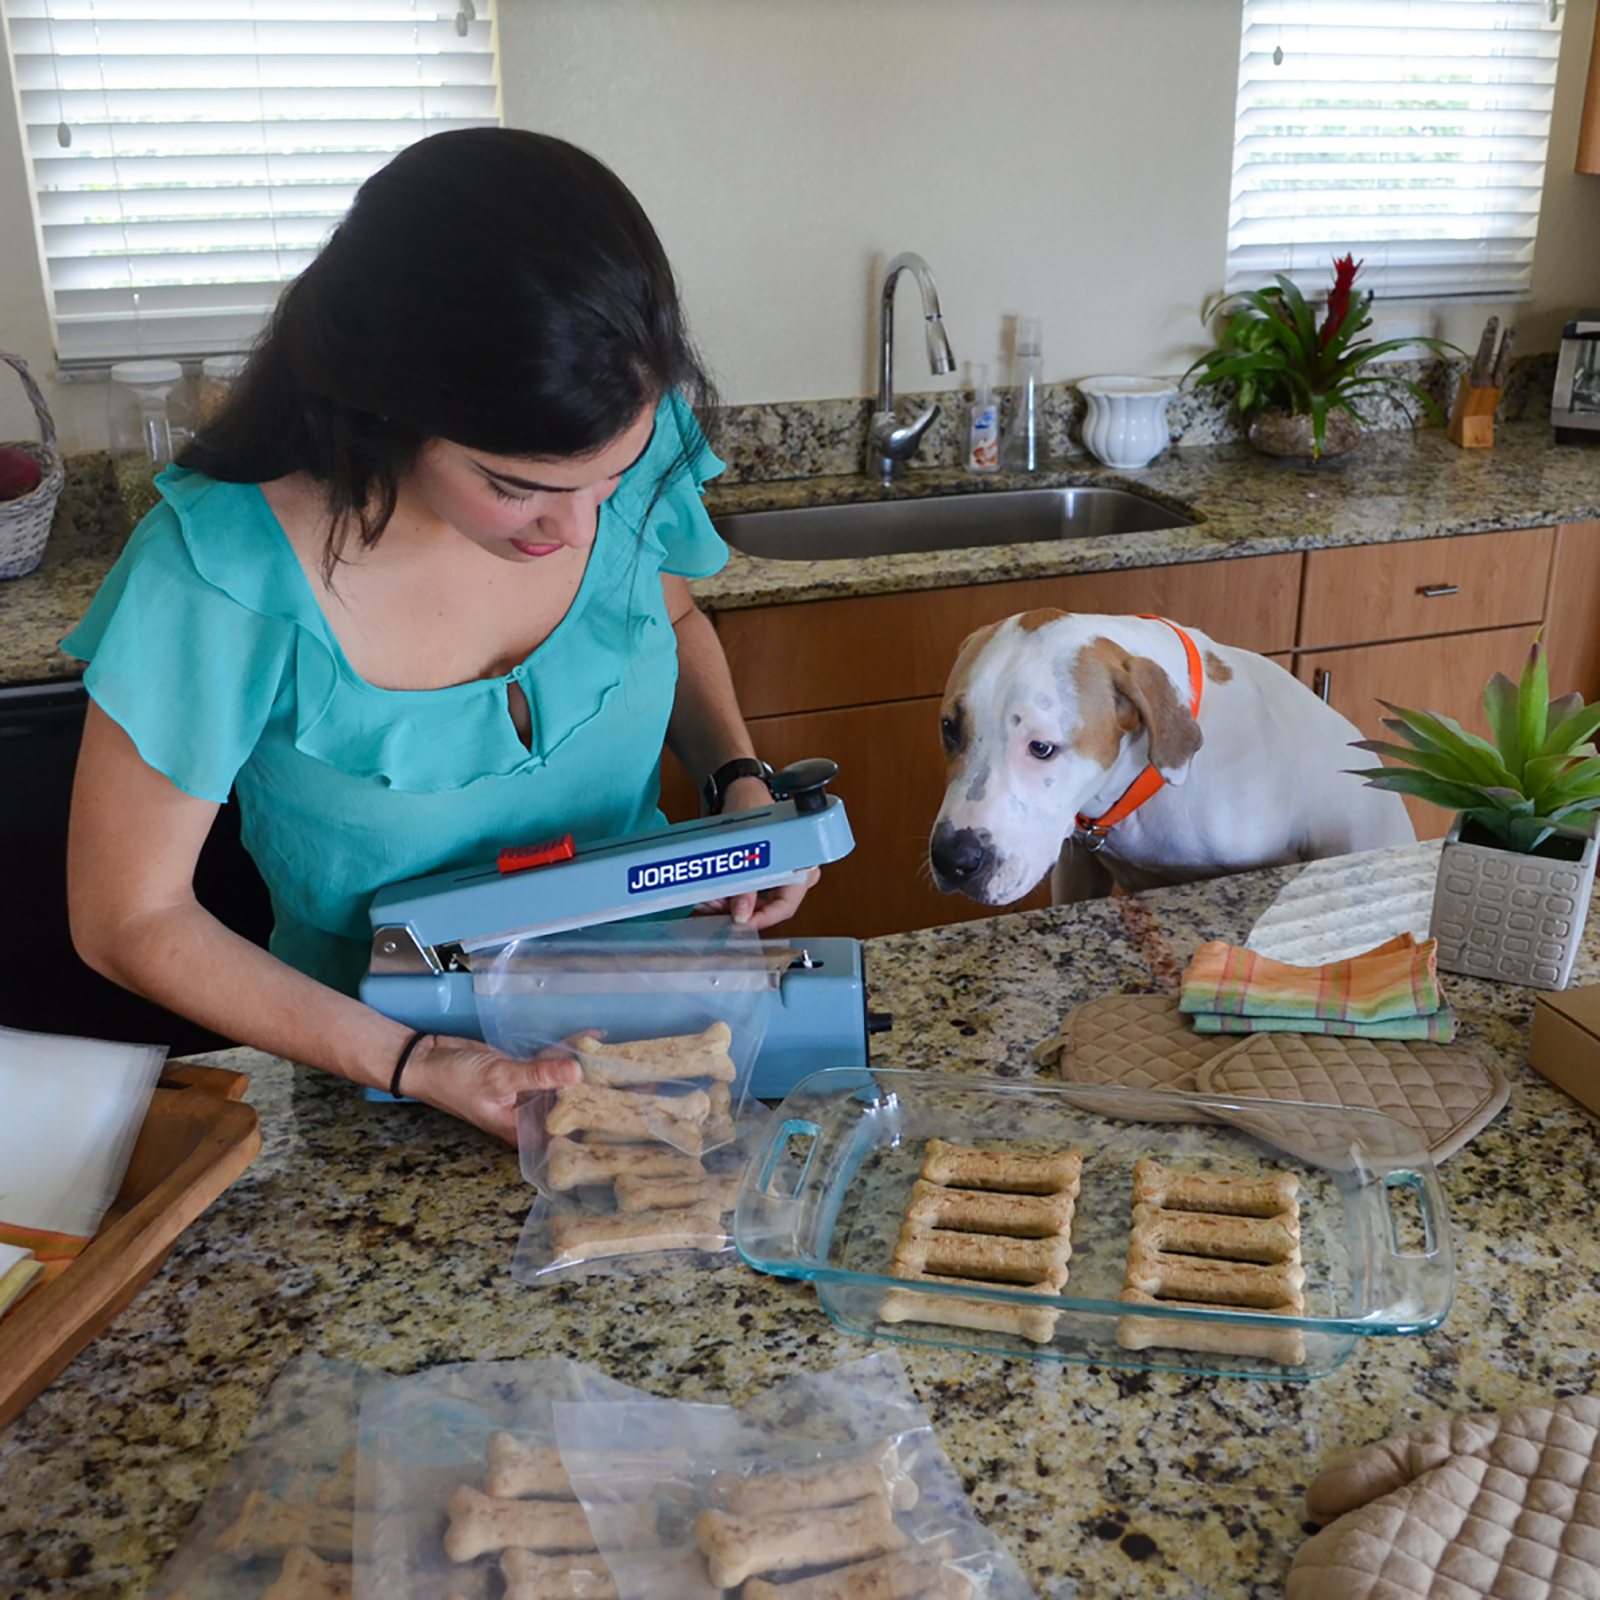 Woman and her dog in their kitchen. she is packaging Dog treats in sealable bags with the JORESTECH 8 inch manual impulse sealer.